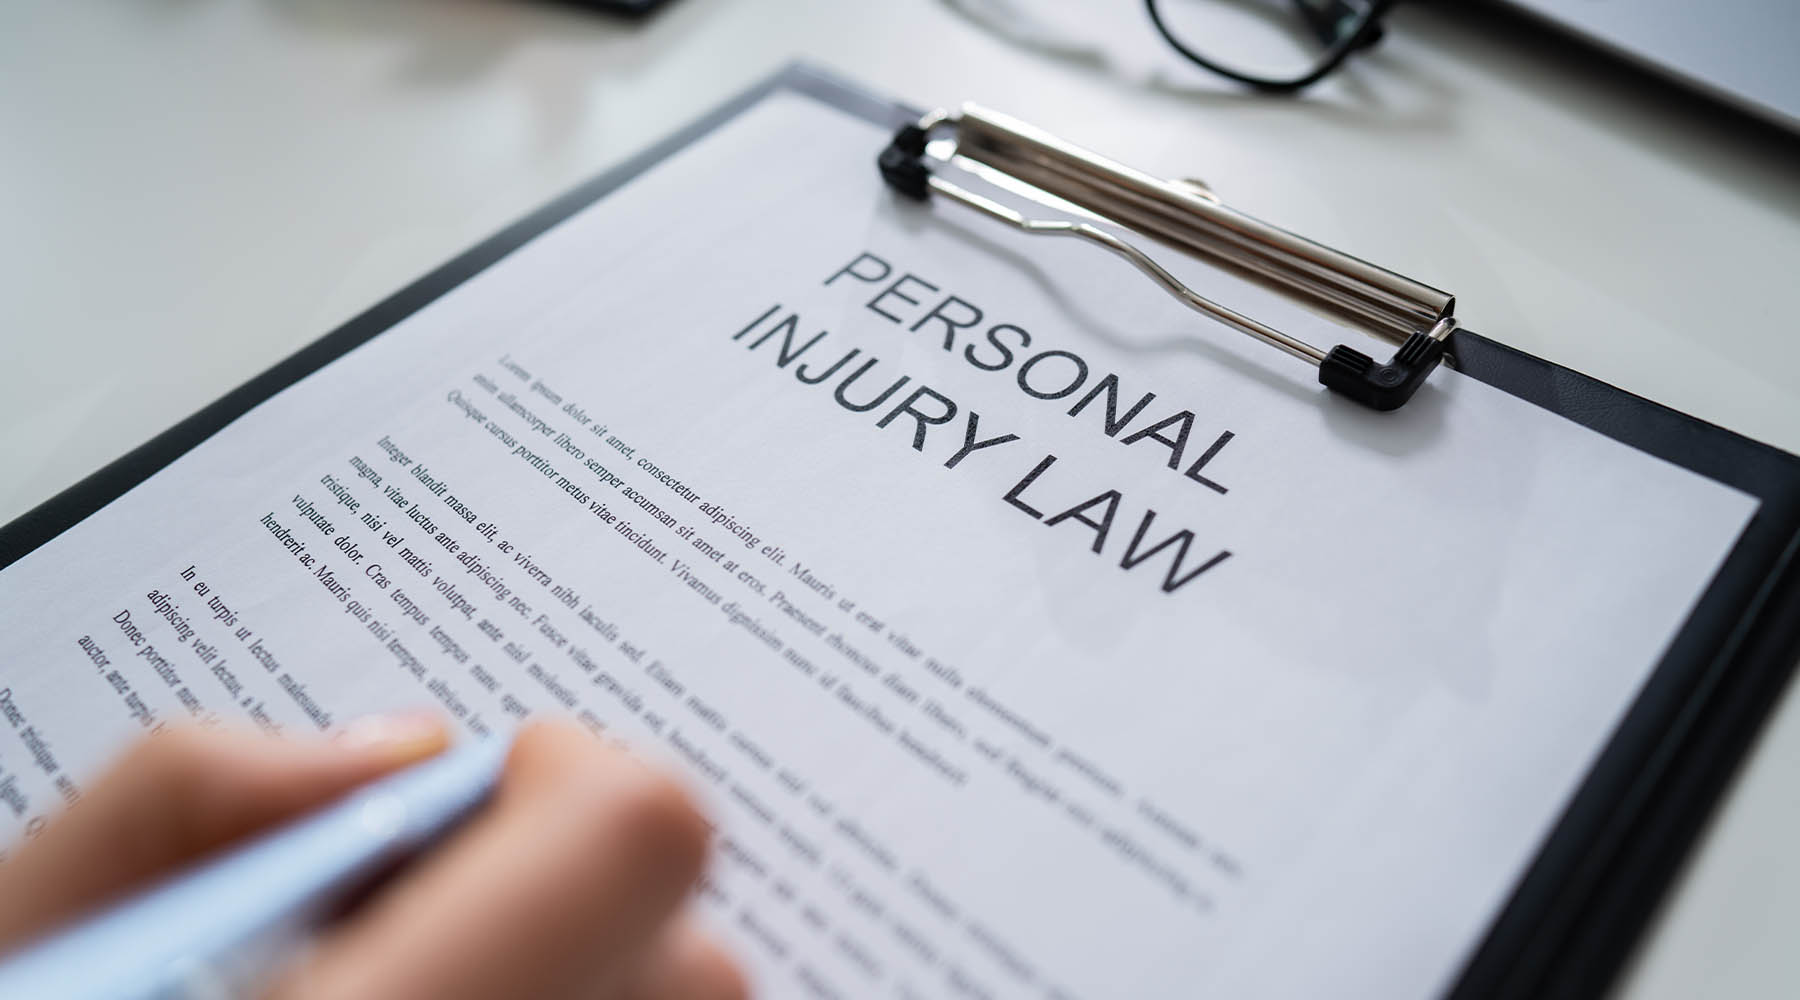 Misconception 3: Personal injury lawsuits are always adversarial